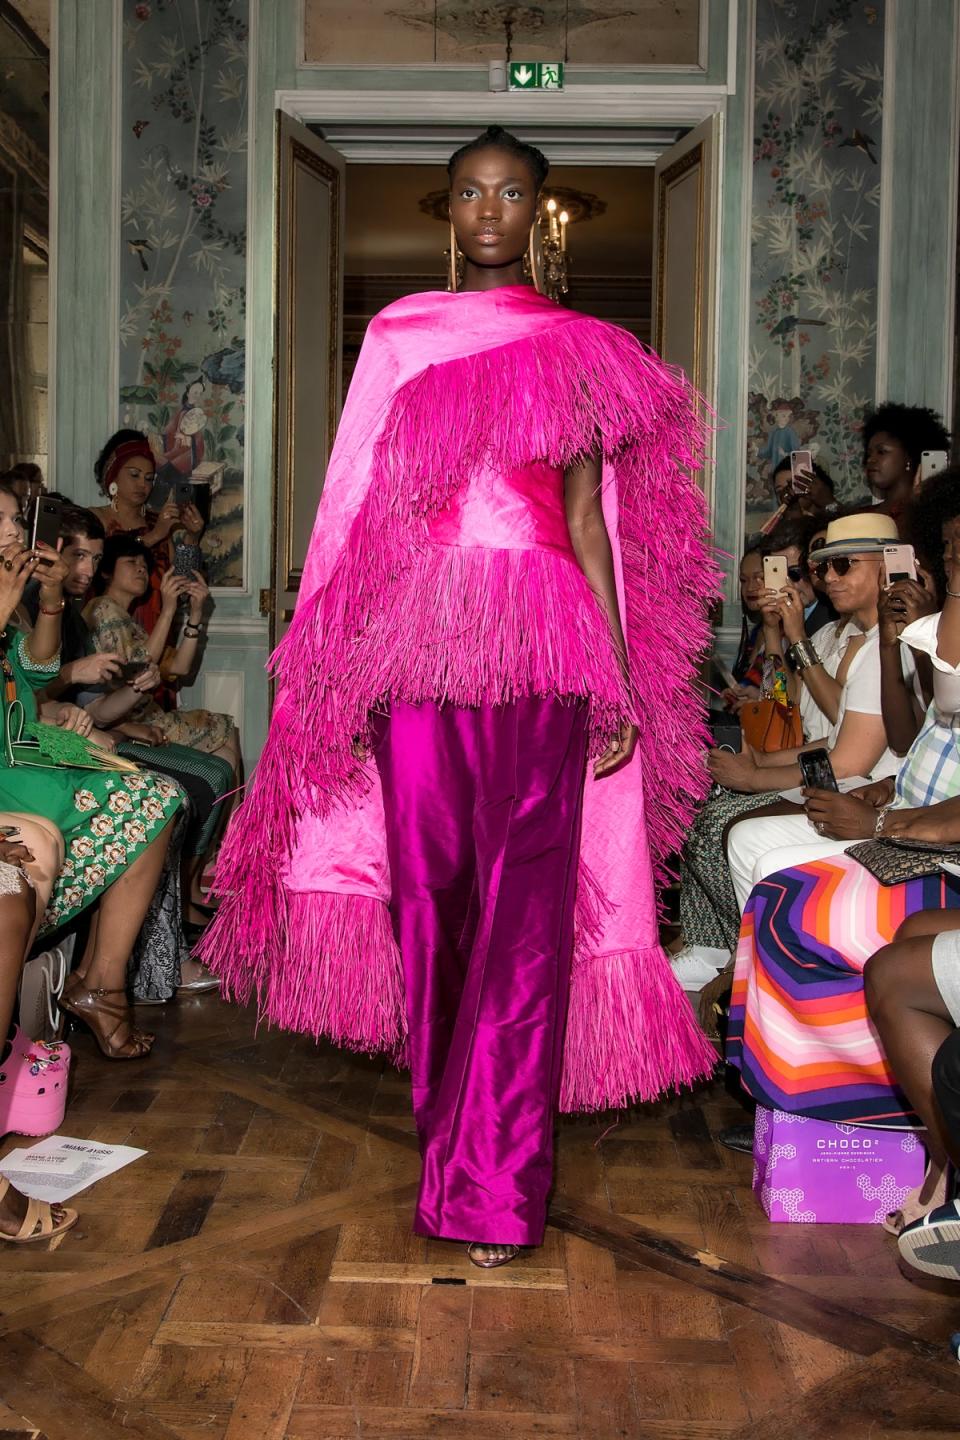 Mbeuk Idourrou collection, Imane Ayissi, Paris, France, AutumnWinter 2019 - An image taken from the forthcoming Africa Fashion exhibition at London’s V&A (Fabrice Malard/IMane Ayissi)